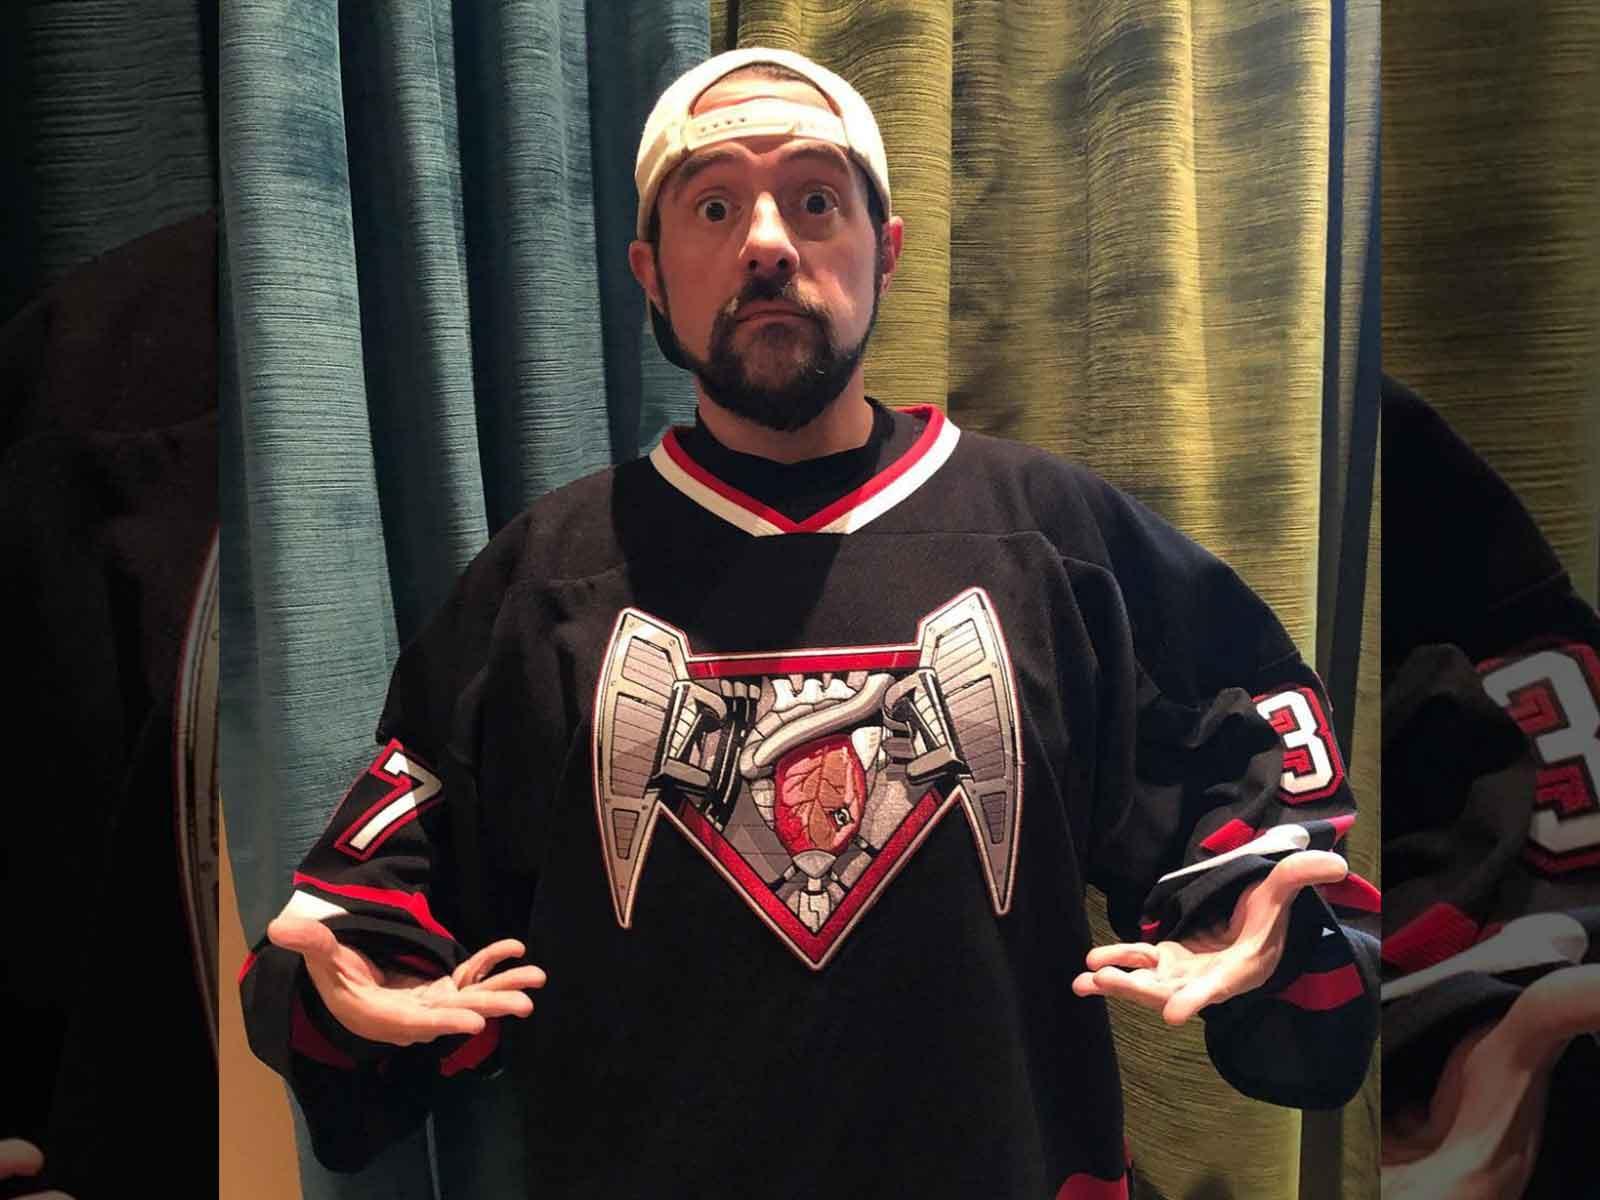 Kevin Smith Down 20 lbs With Penn Jillette’s Magical Diet